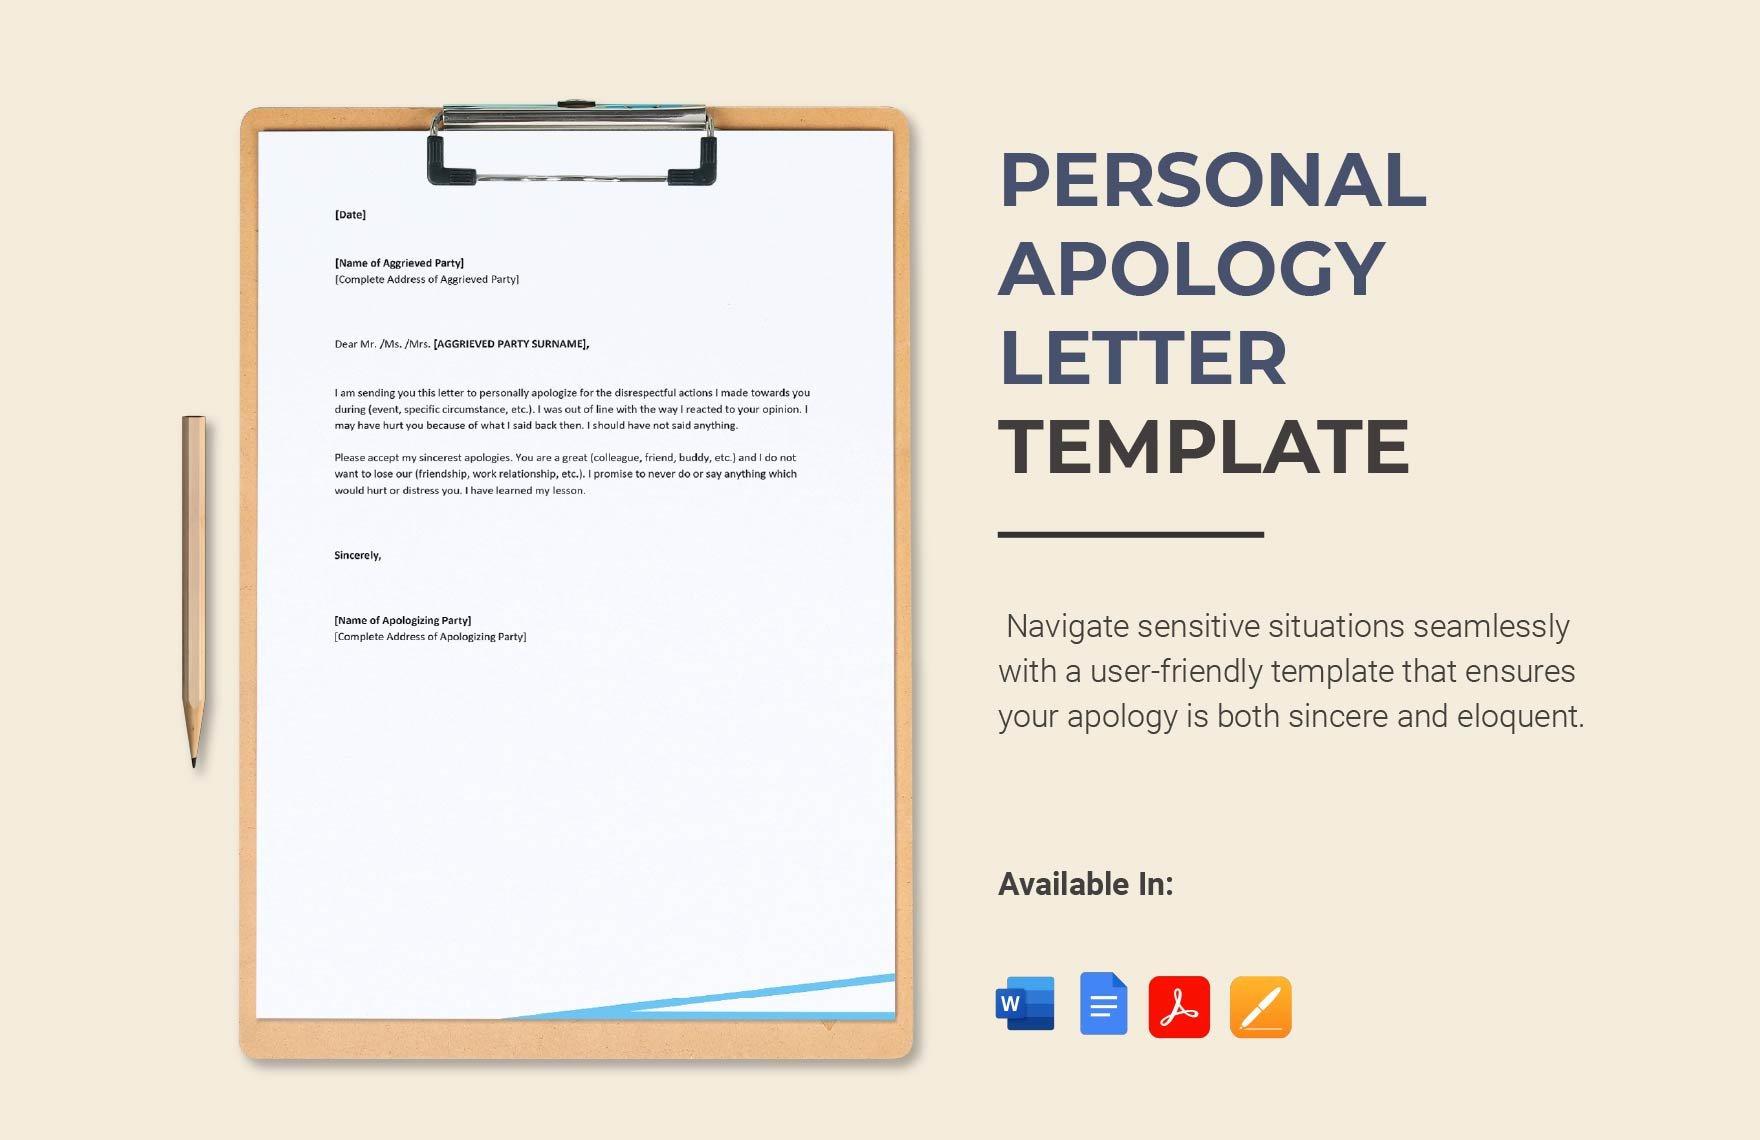 Personal Apology Letter Template